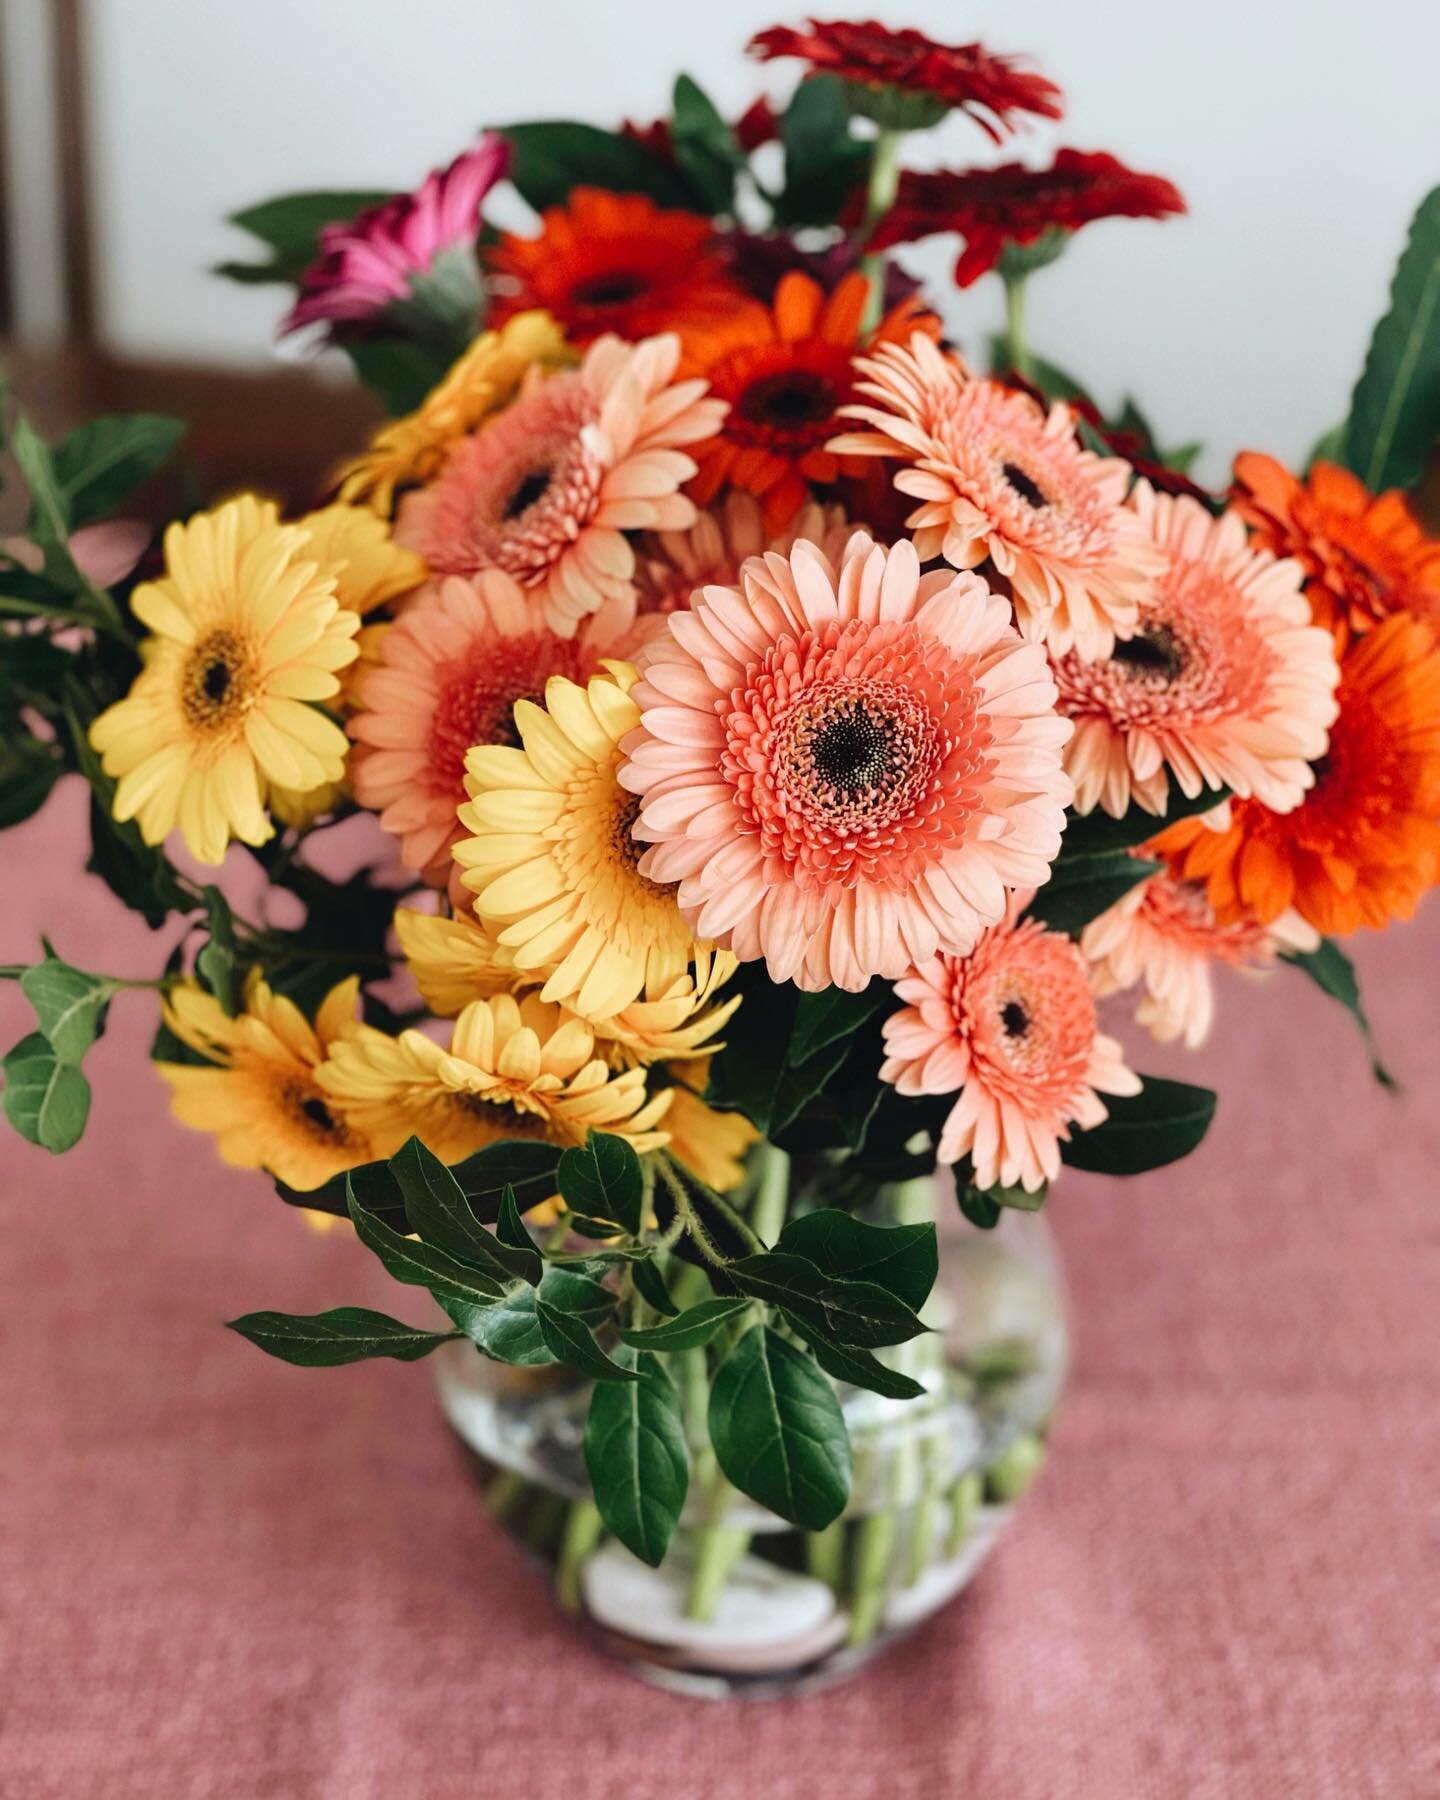 Repurposing 4-day old #gerberas from a tall (swipe to far ⬅️ to see original) to shorter and spunkier vase arrangement 
. . . 
www.thebaliflorist.com
. . . 
Less wrapping | no single-use vessels | #sustainablefloristry
. . . 
Inquiries on orders/work